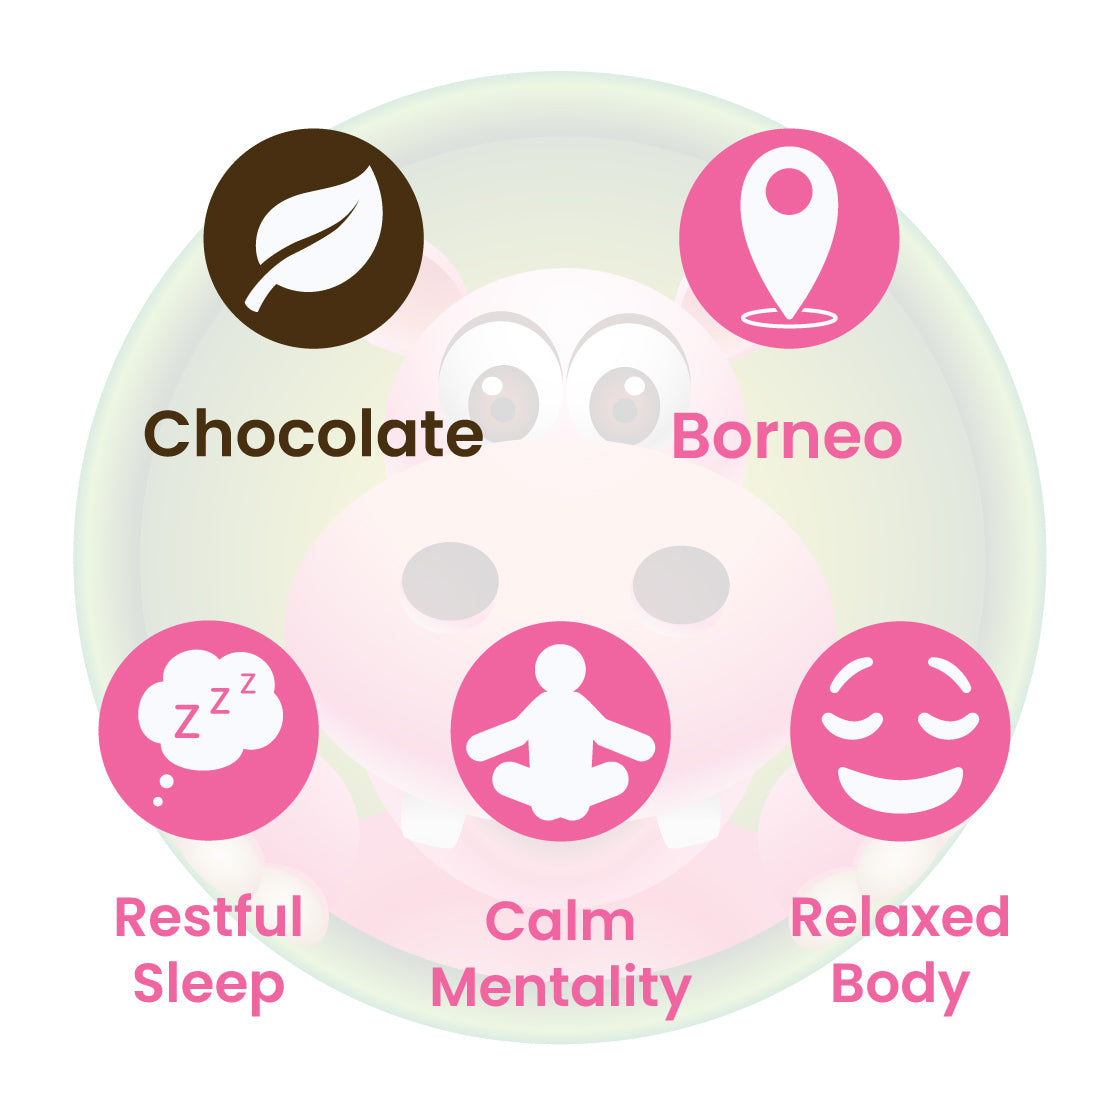 Infographic Details for Happy Hippo Dark Forest Chocolate Kratom Powder. Leaf color: Chocolate. Kratom Strain Origin: Borneo. Kratom Effects resonate with restful sleep, calm mentality, and a relaxed body.